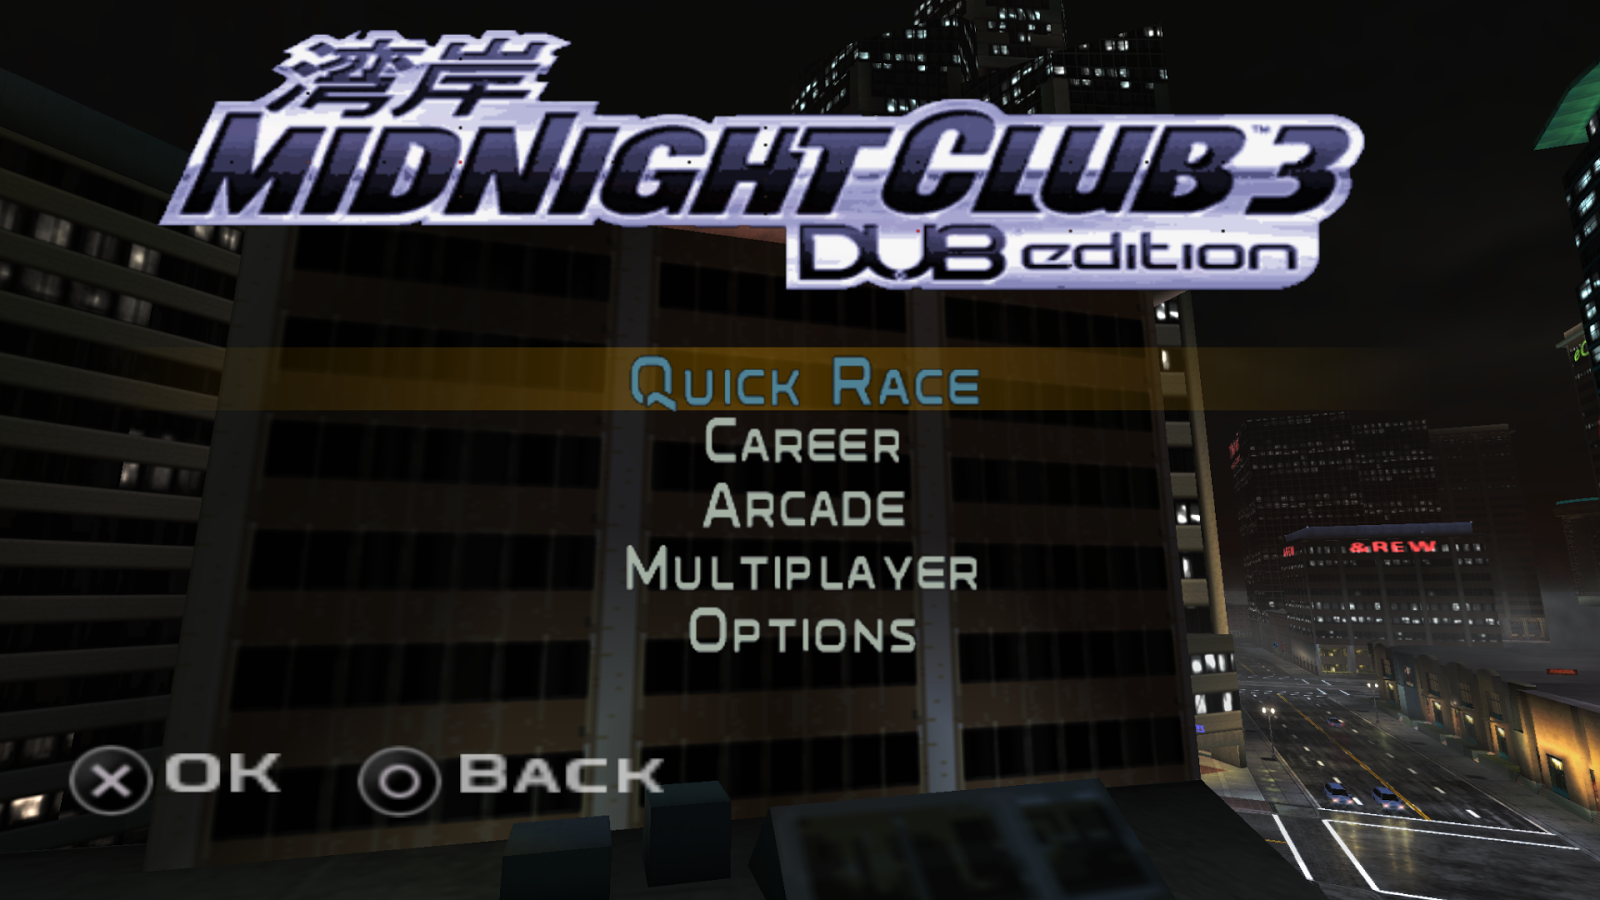 download file midnight club 3 dub edition remix ppsspp